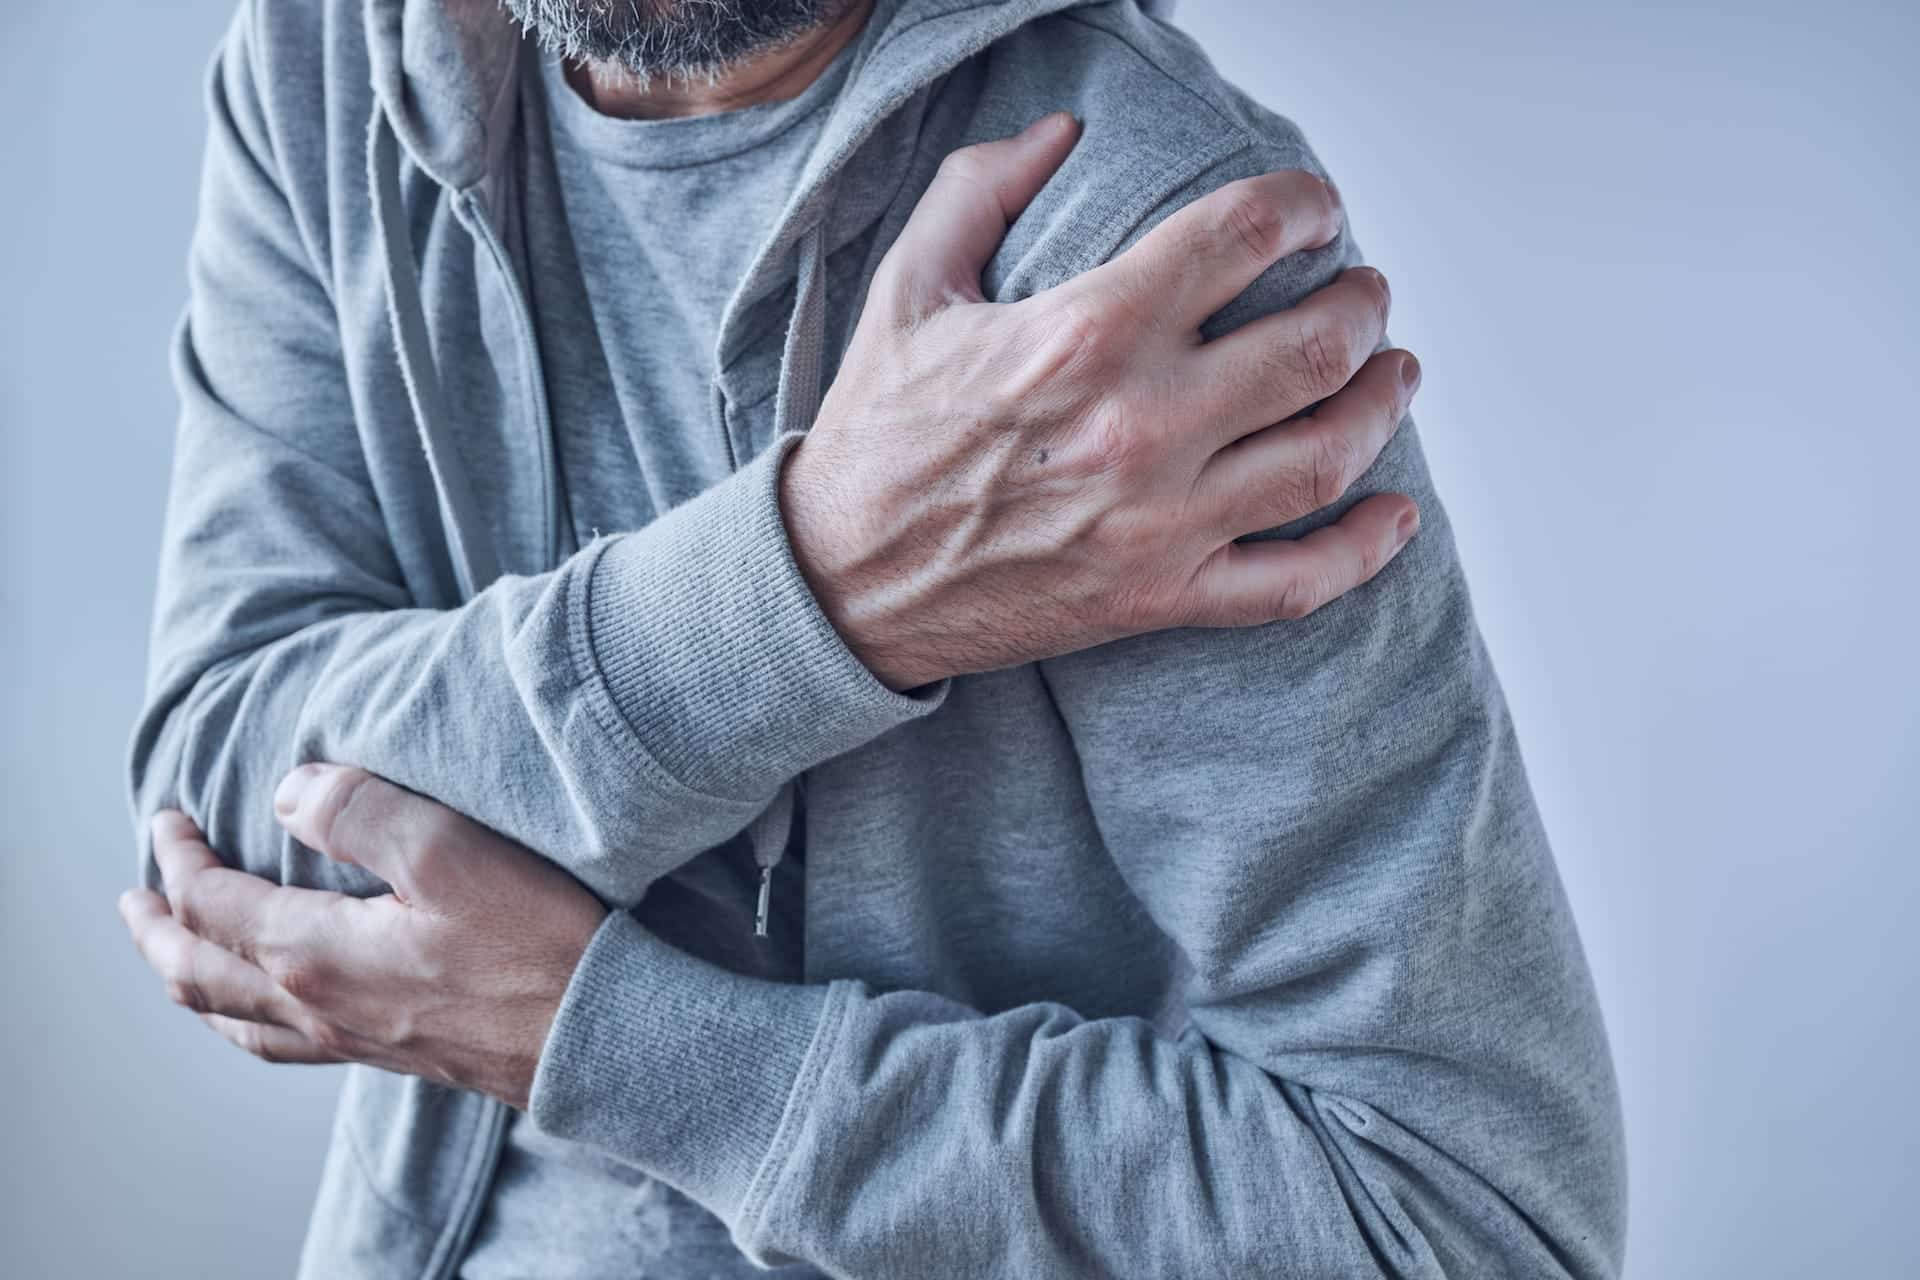 A middle aged man with a grey beard is clutching his left shoulder in pain. He is wearing a grey lip up jumper and a grey shirt. He has a posture of bending forward at 15 degrees in shoulder pain.